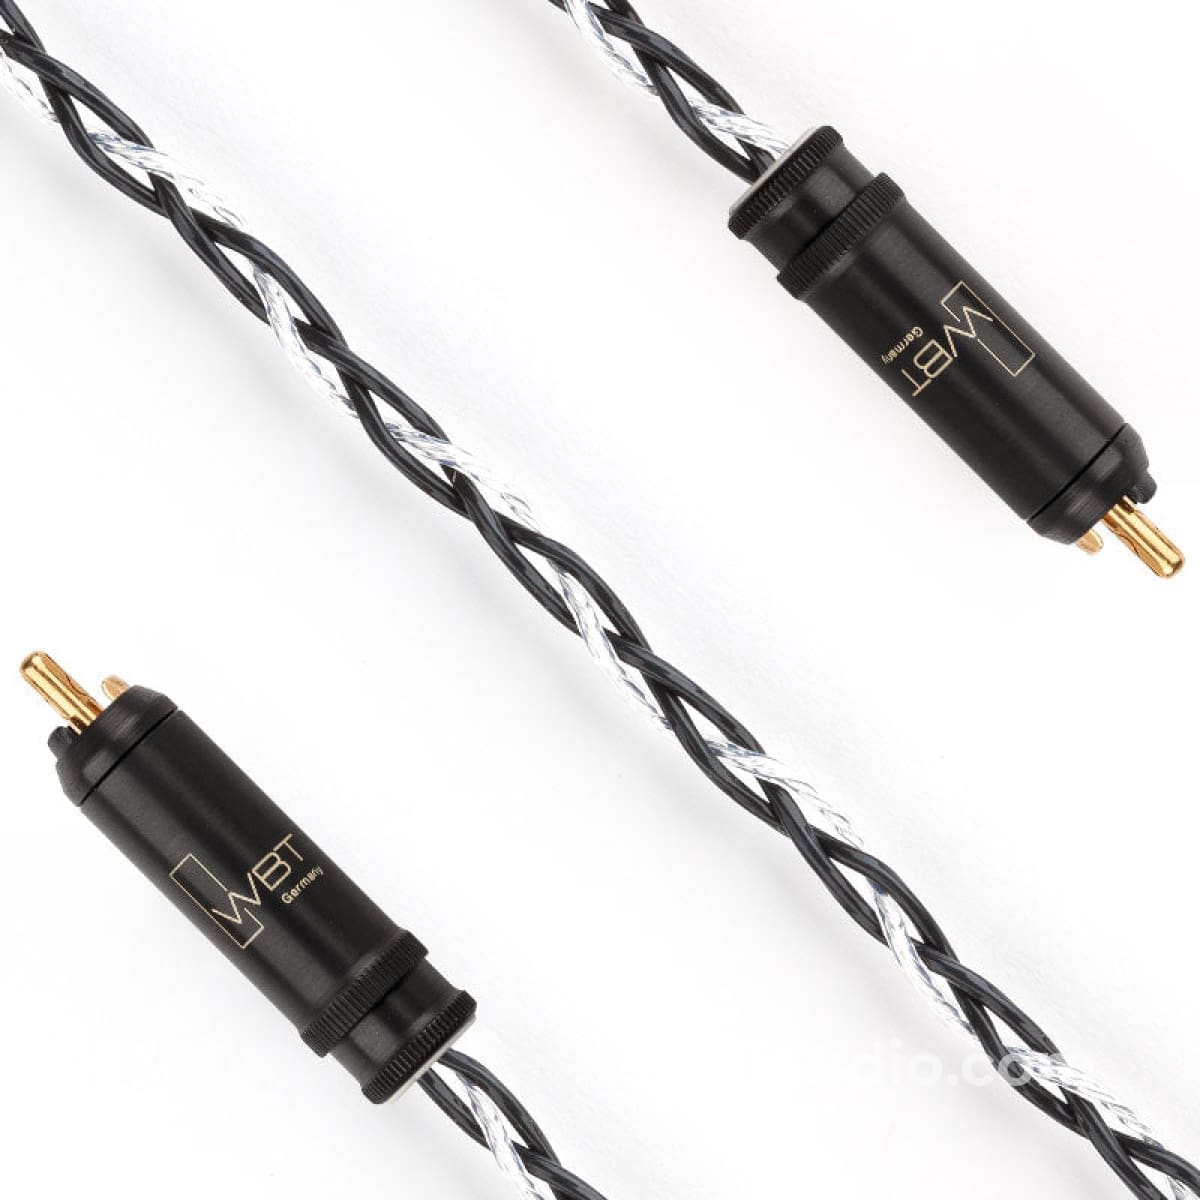 Kimber Kable - Summit Series Silver Streak Analog Interconnects (PAIR) -  RCA Ultraplate or WBT Connectors - New